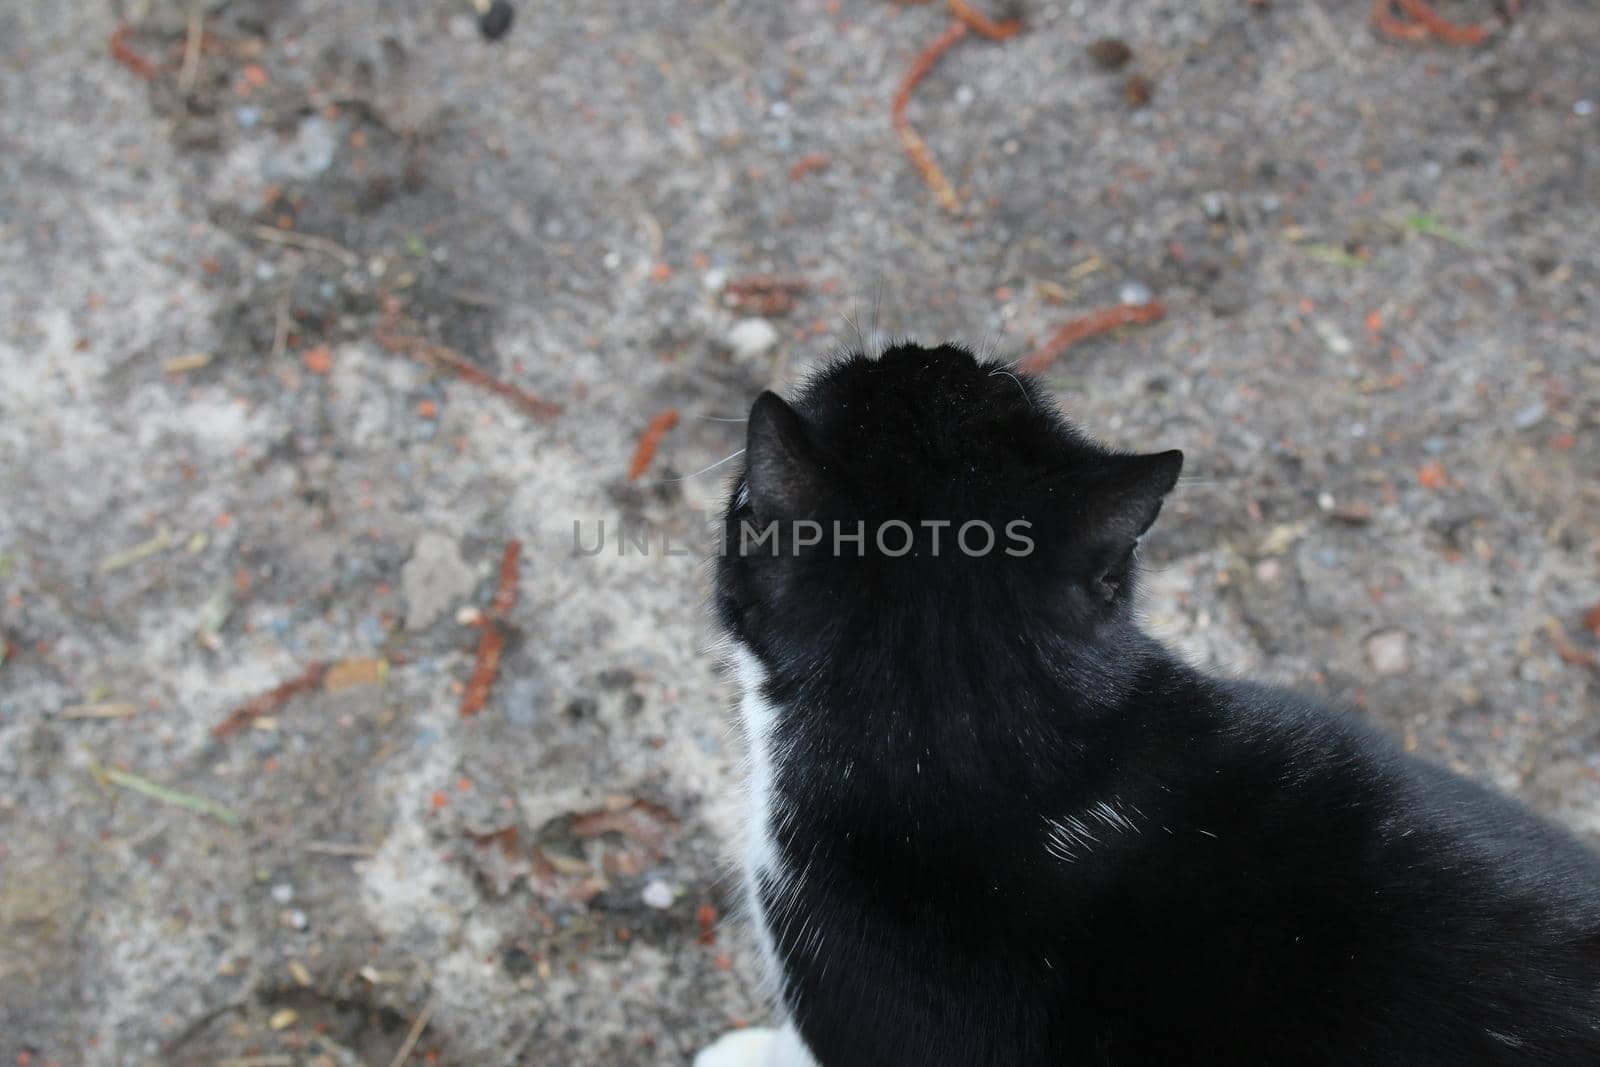 Black cat from aboveagainst a grey undersoil by Luise123